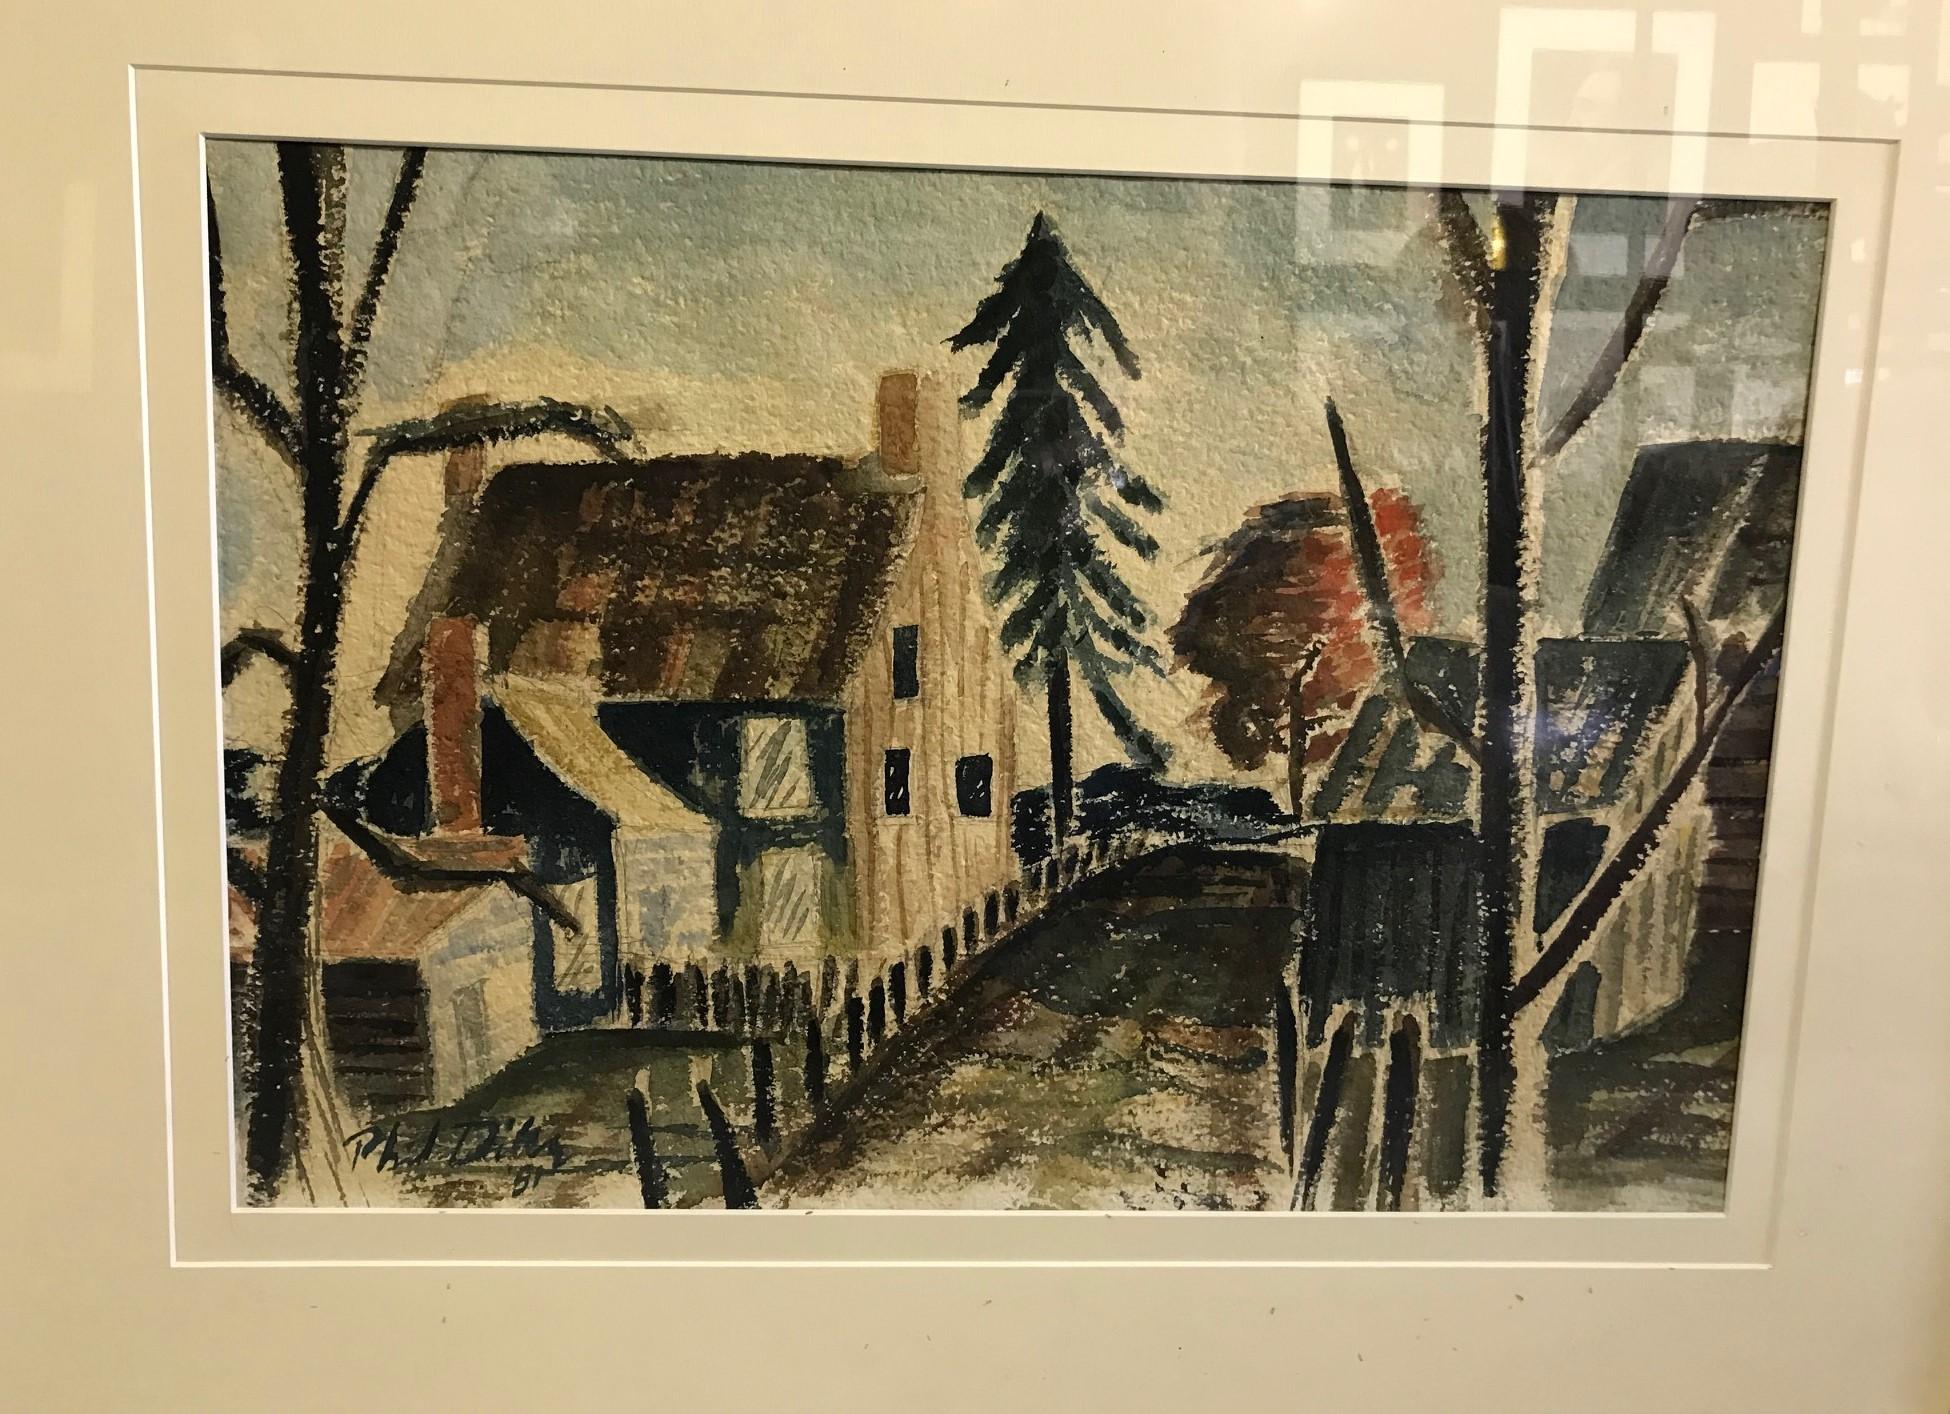 A beautiful work by American/ California born artist Phil Dike who was one of the main innovators in the development of the California watercolor painting movement. Dike also worked for Walt Disney Studios where he worked on such animated Classic